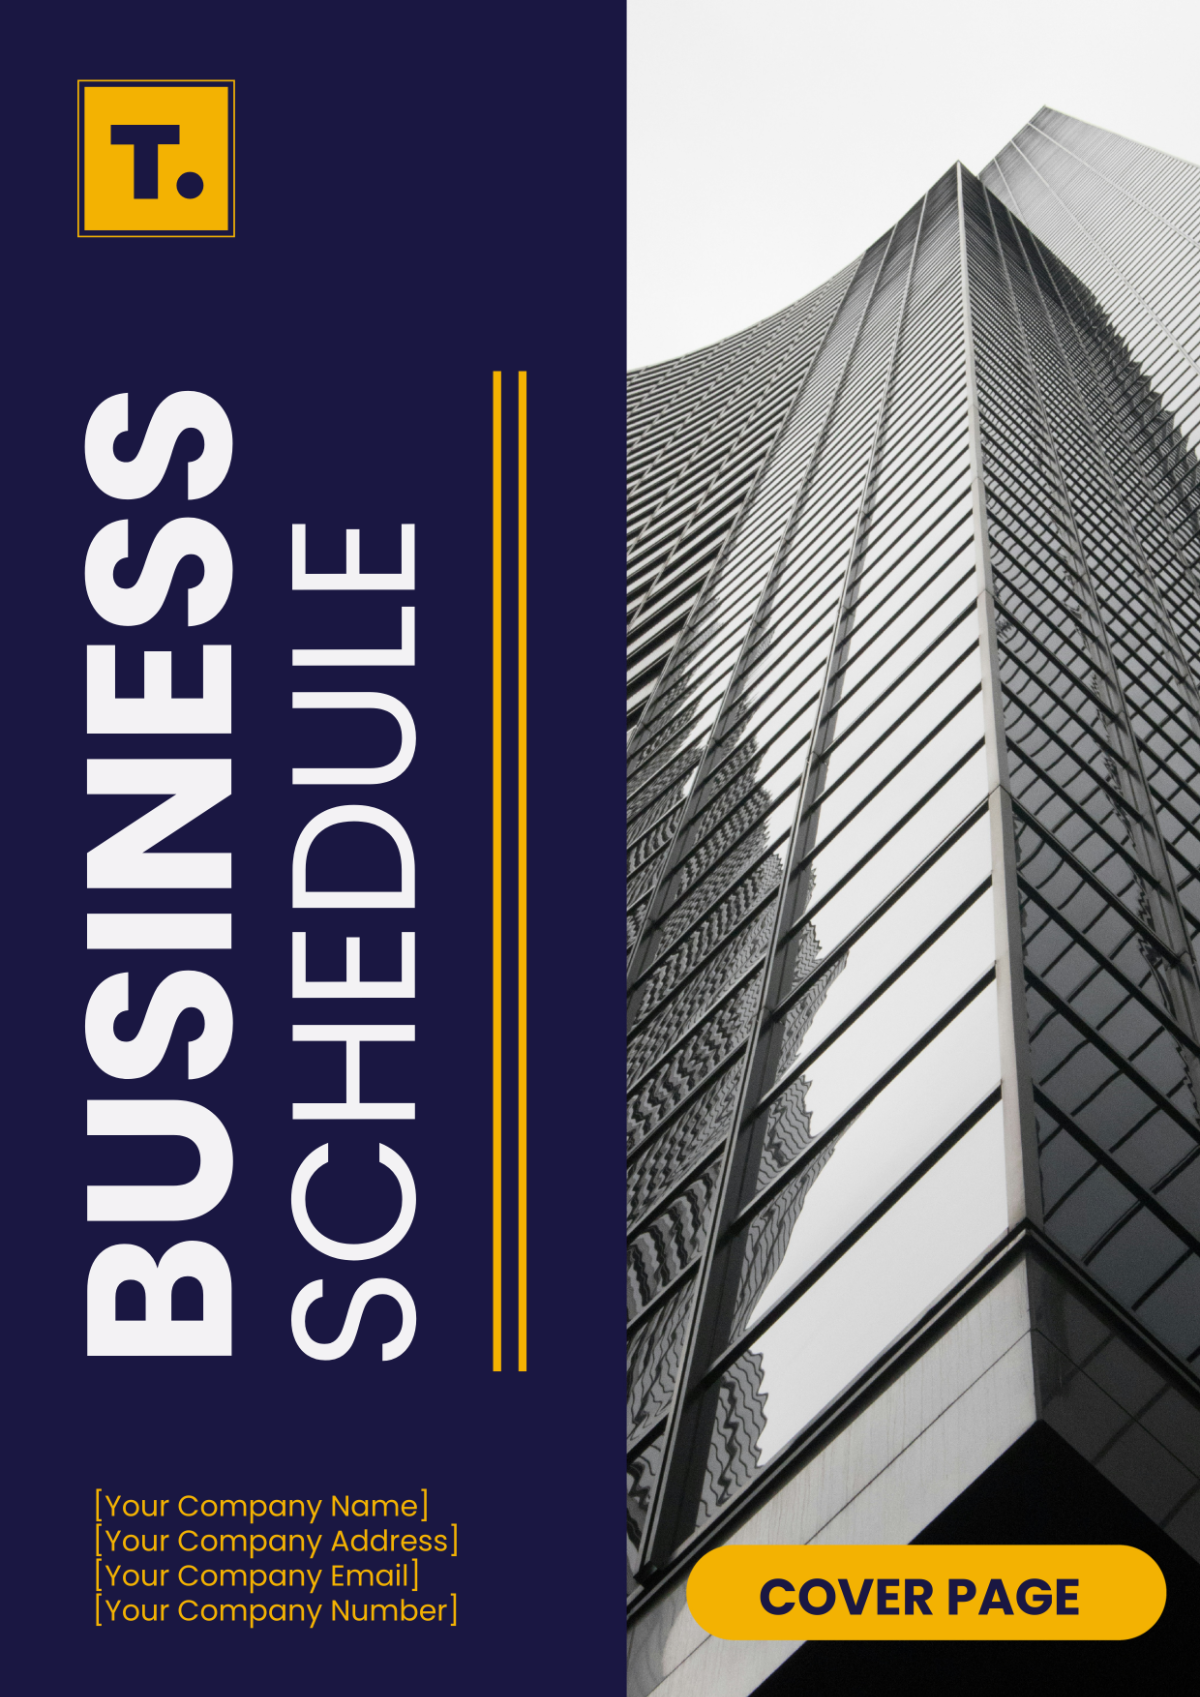 Business Schedule Cover Page